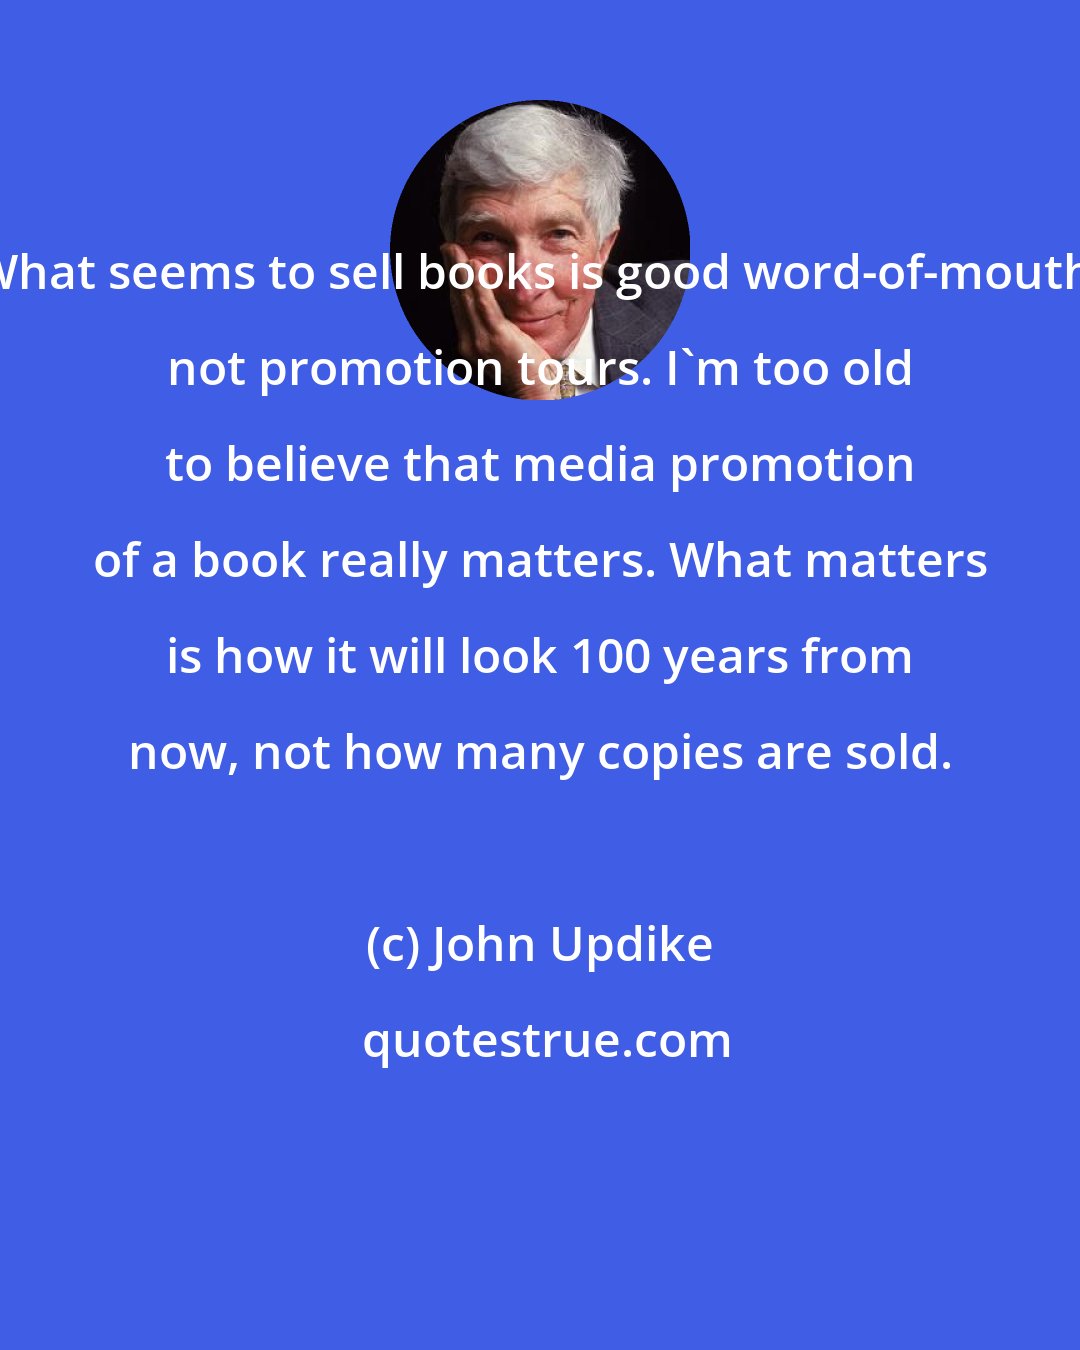 John Updike: What seems to sell books is good word-of-mouth, not promotion tours. I'm too old to believe that media promotion of a book really matters. What matters is how it will look 100 years from now, not how many copies are sold.